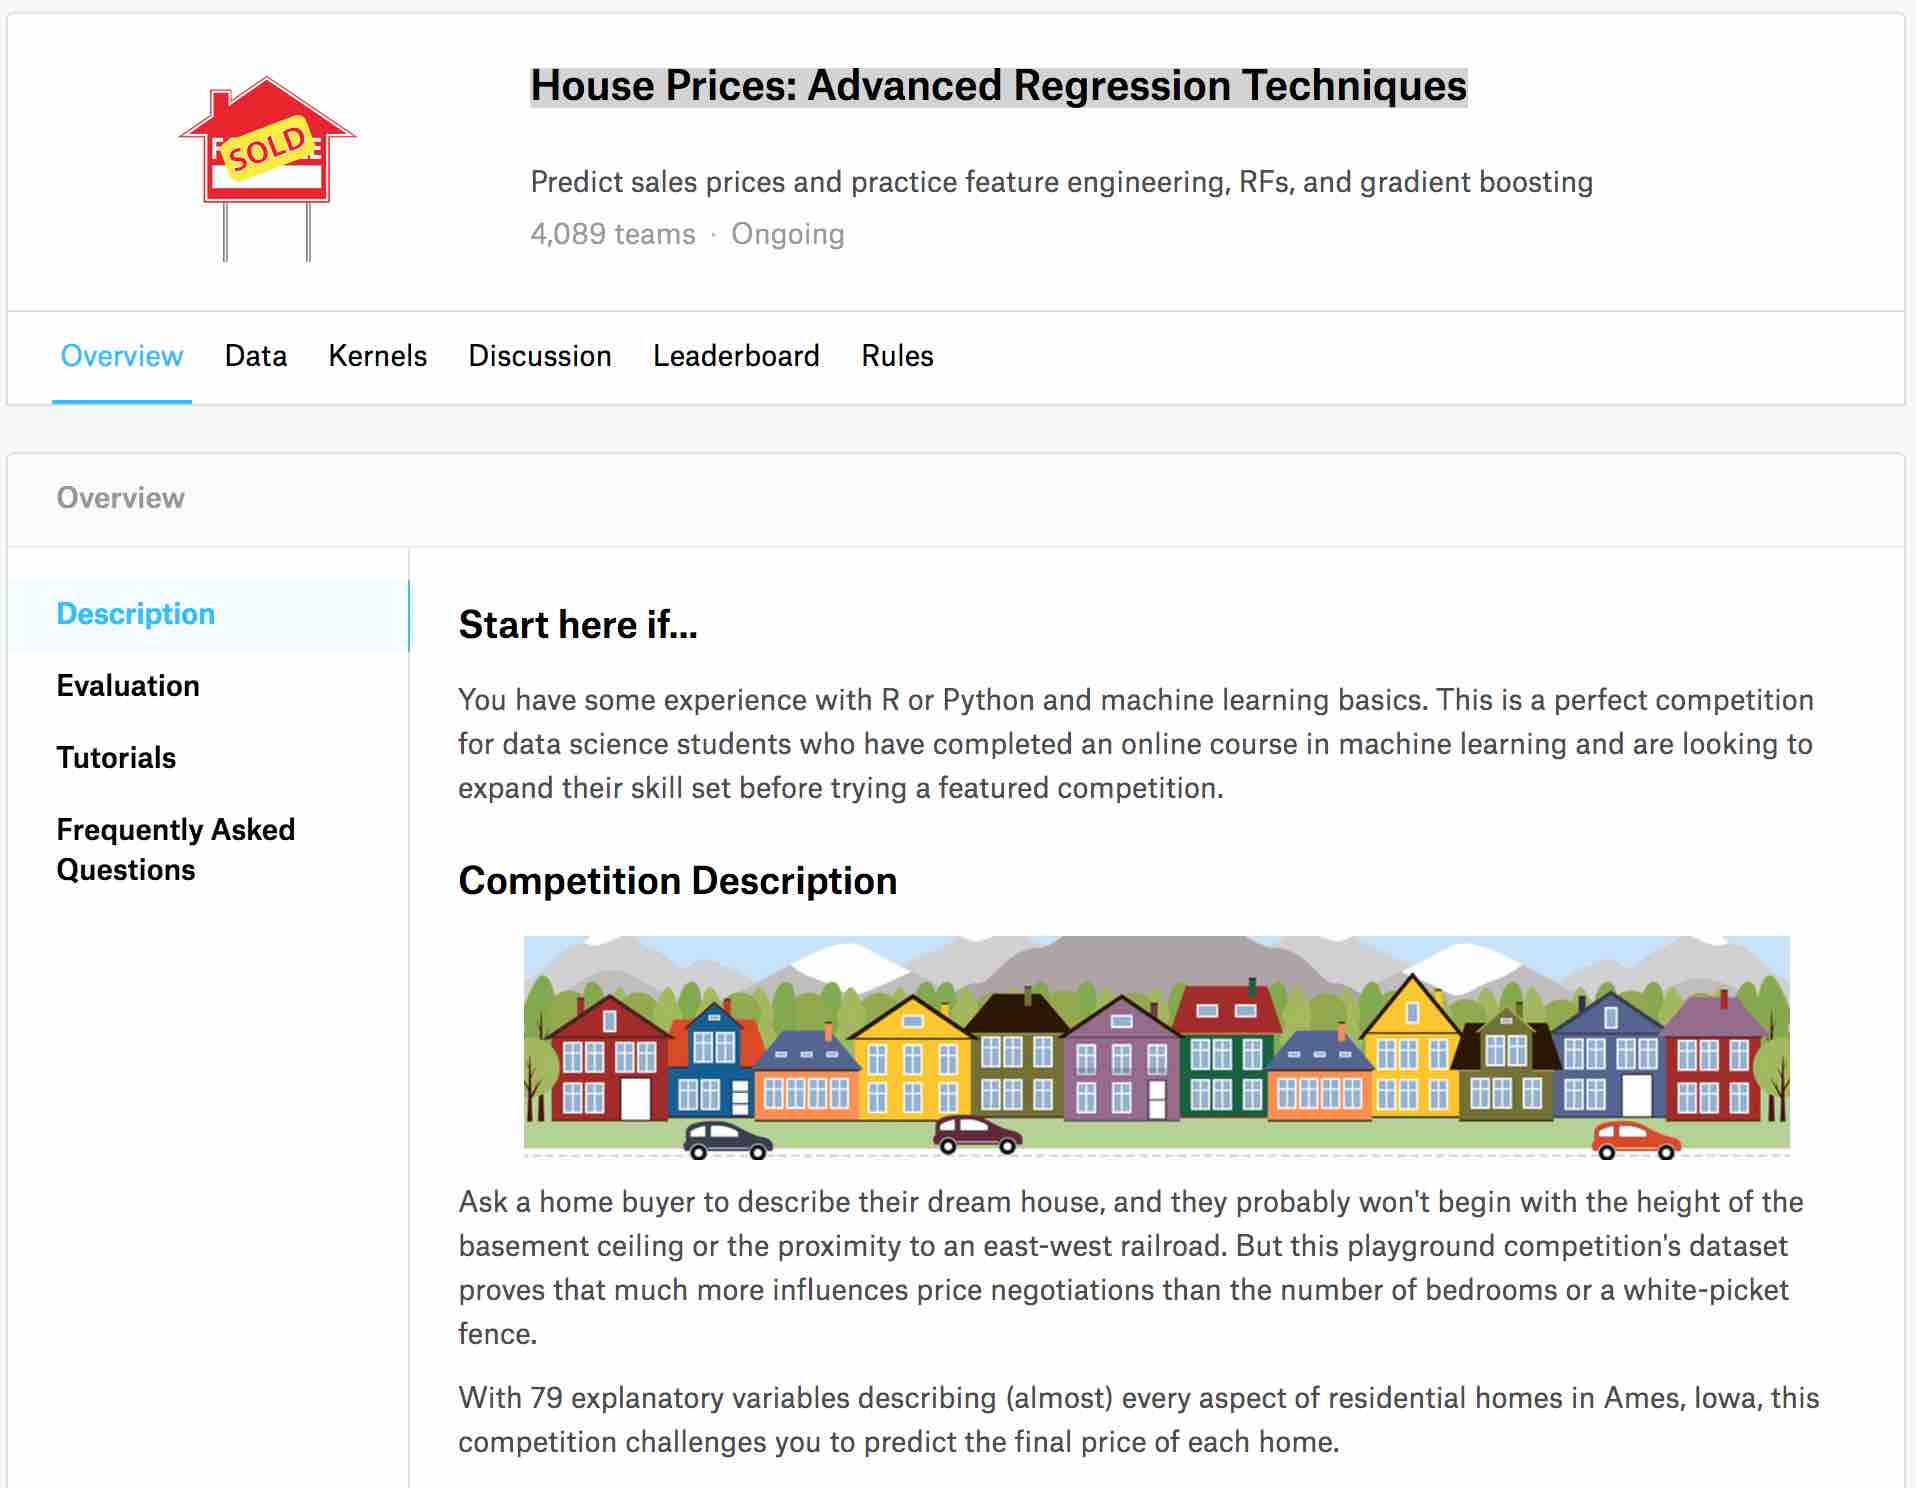 House prices Kaggle competition homepage.